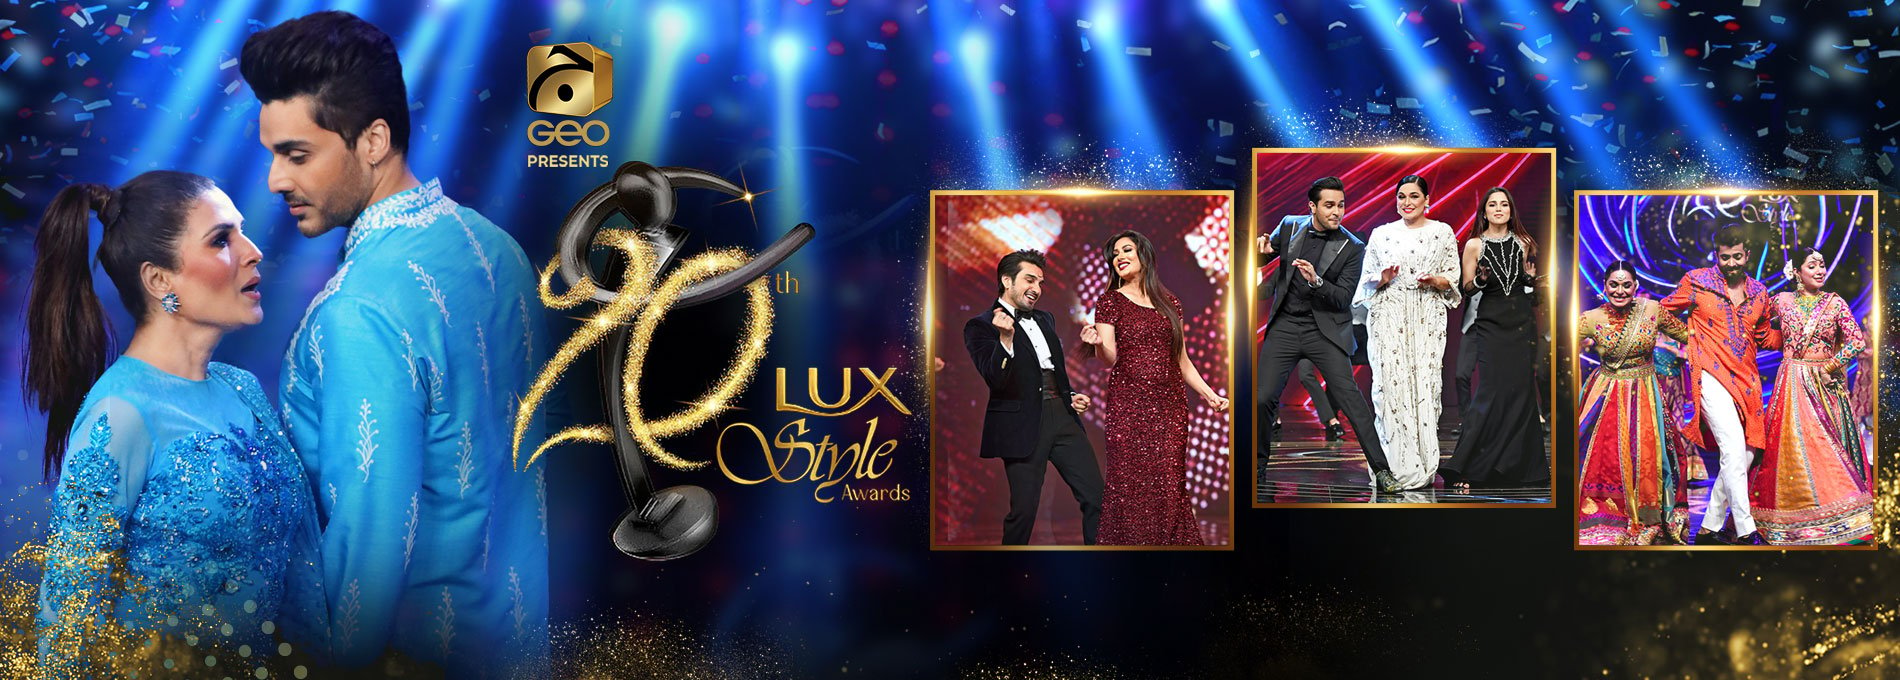 20 Lux Style Awards 2021 - Main Event